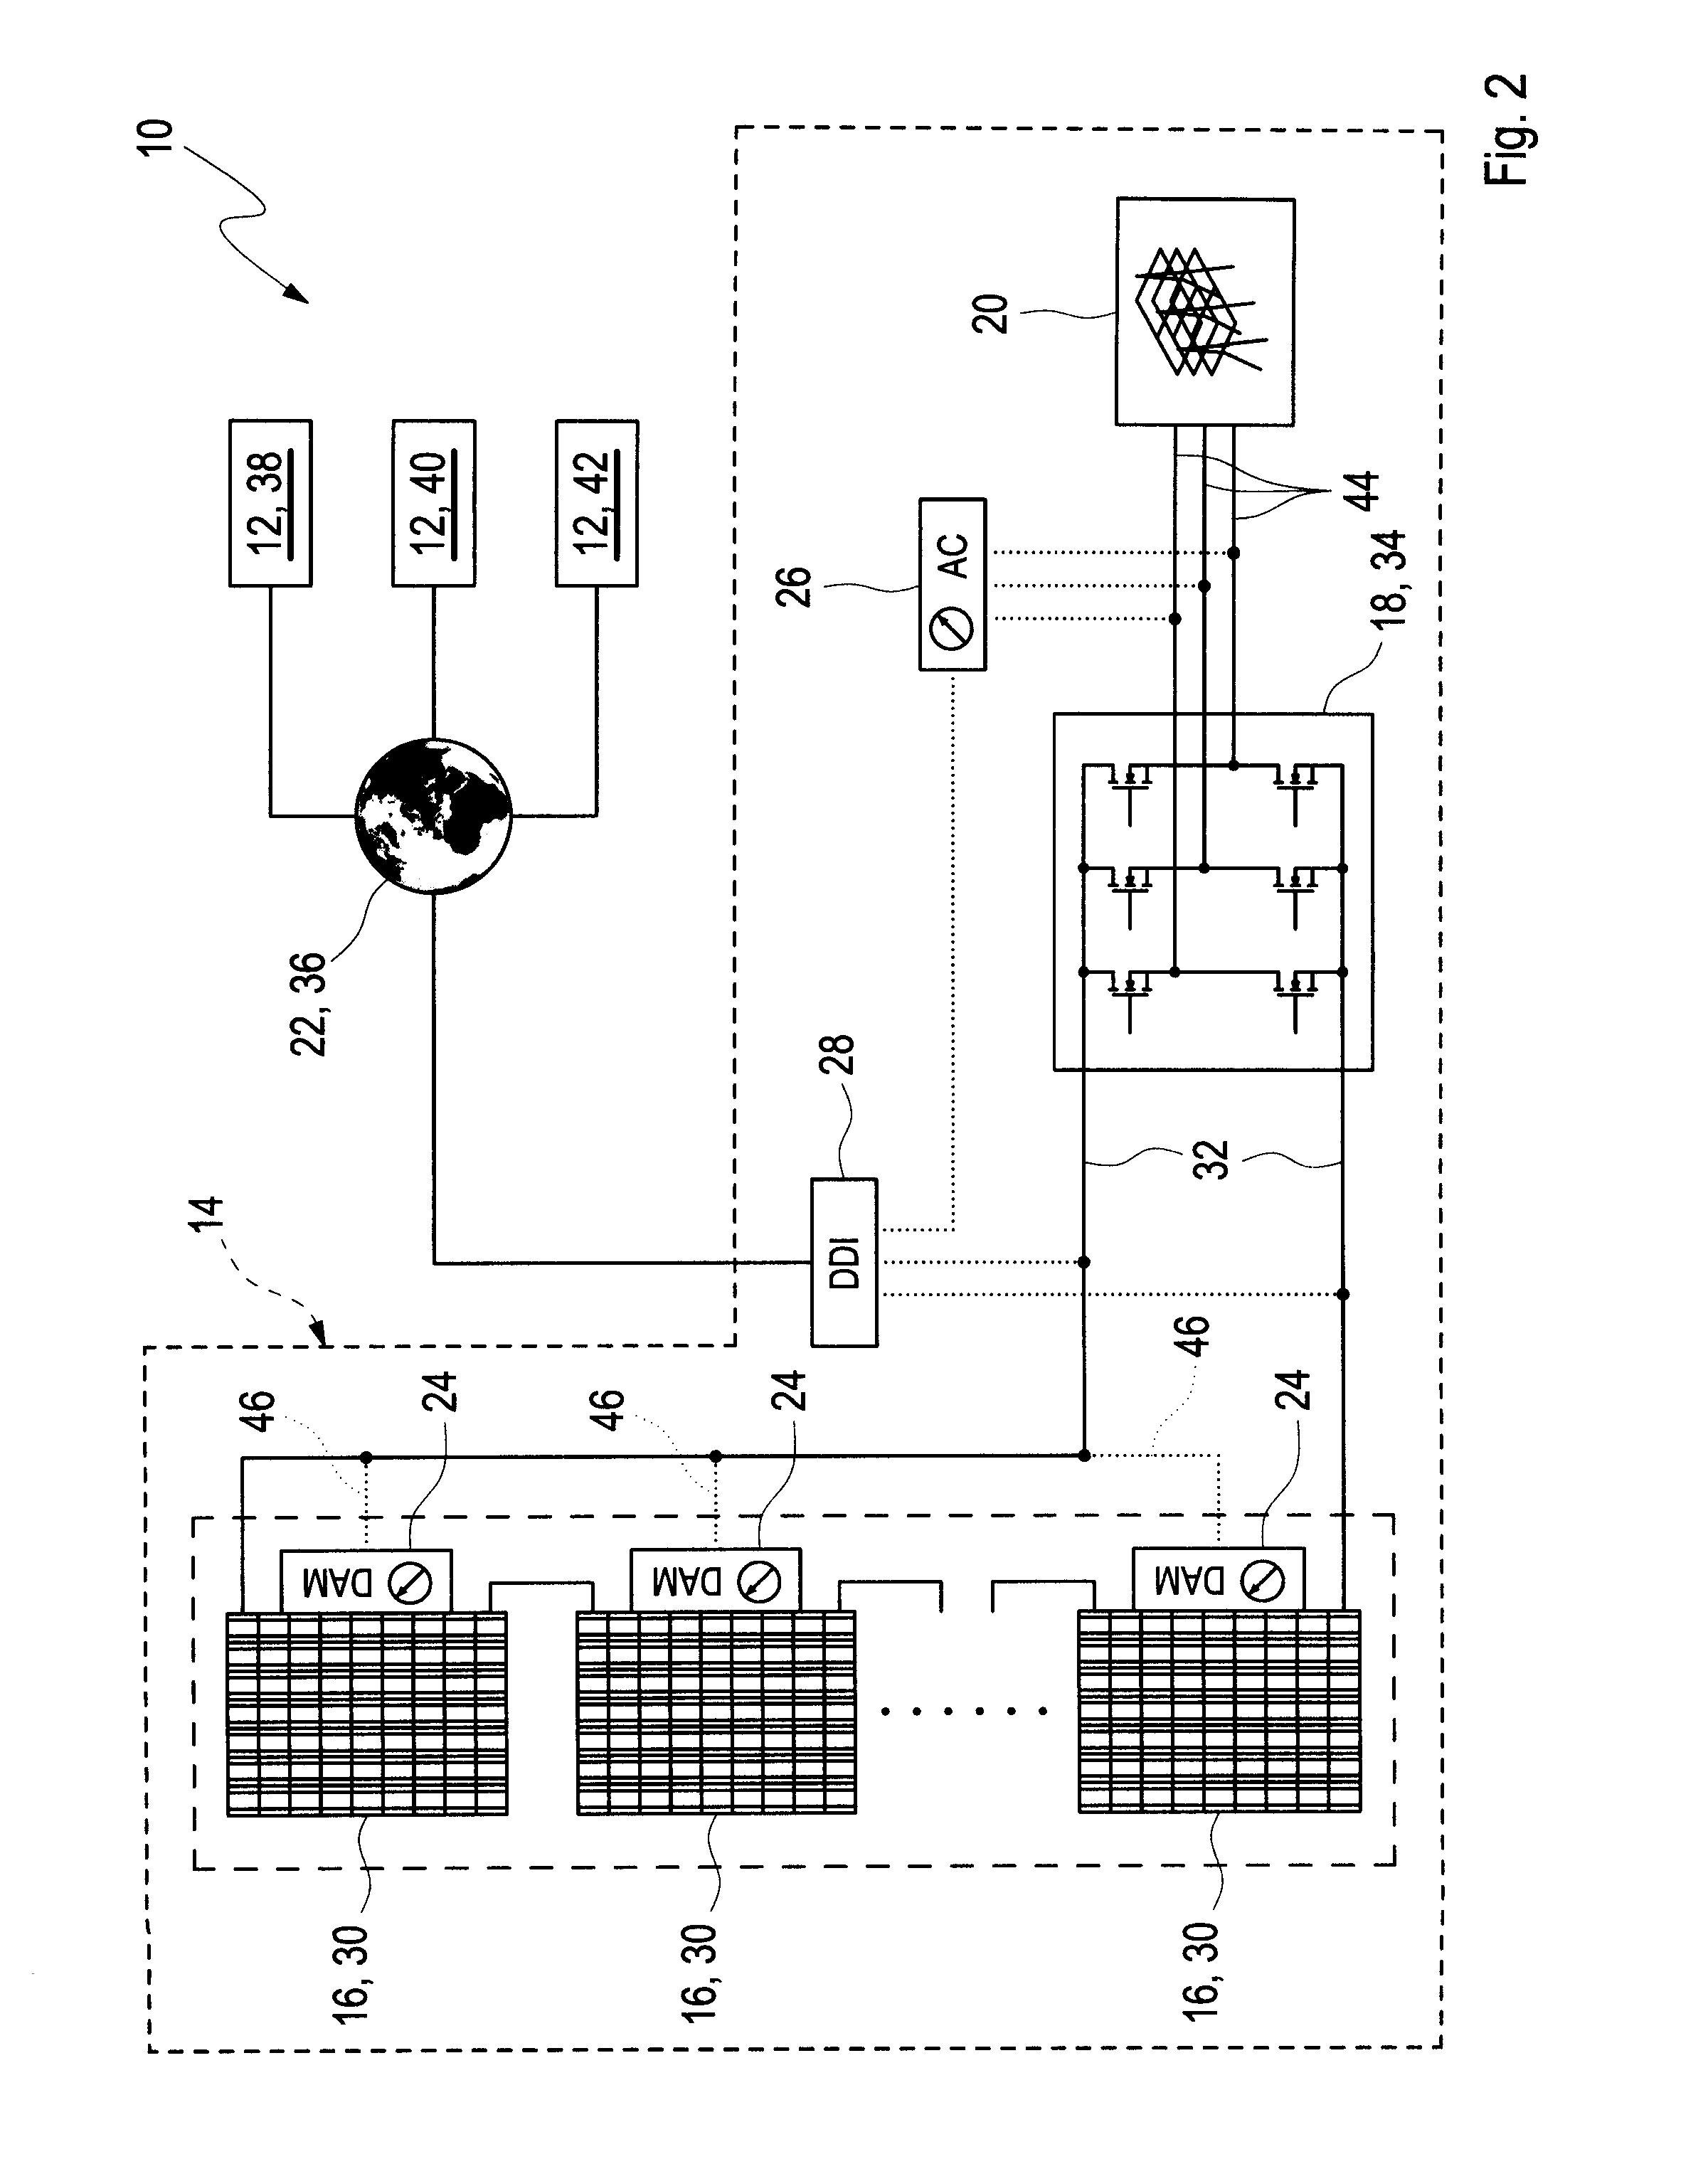 Monitoring System for Power Grid Distributed Power Generation Devices